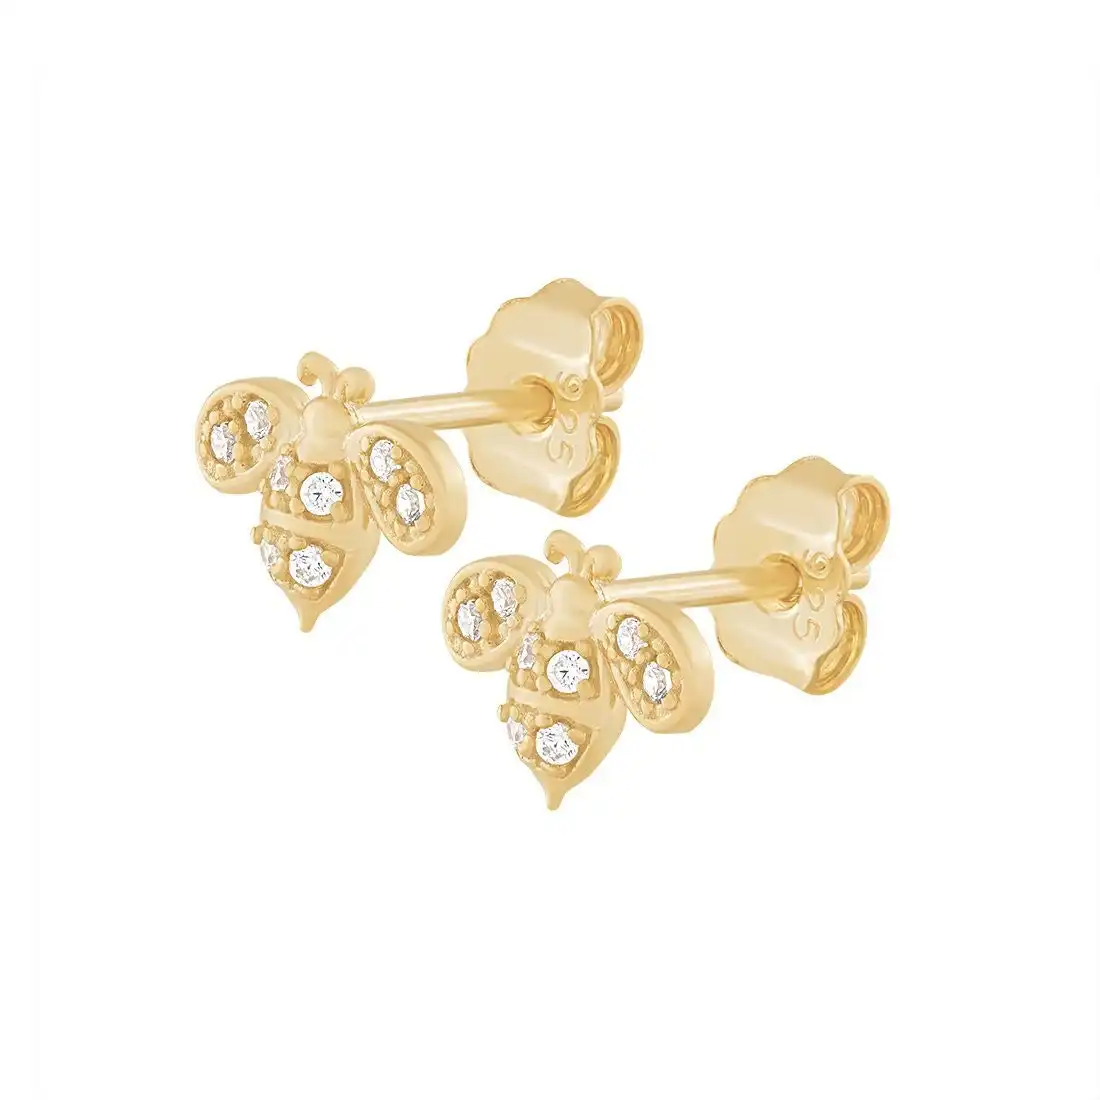 9ct Yellow Gold Silver Infused Bumble Bee with Cubic Zirconia Stud Earrings